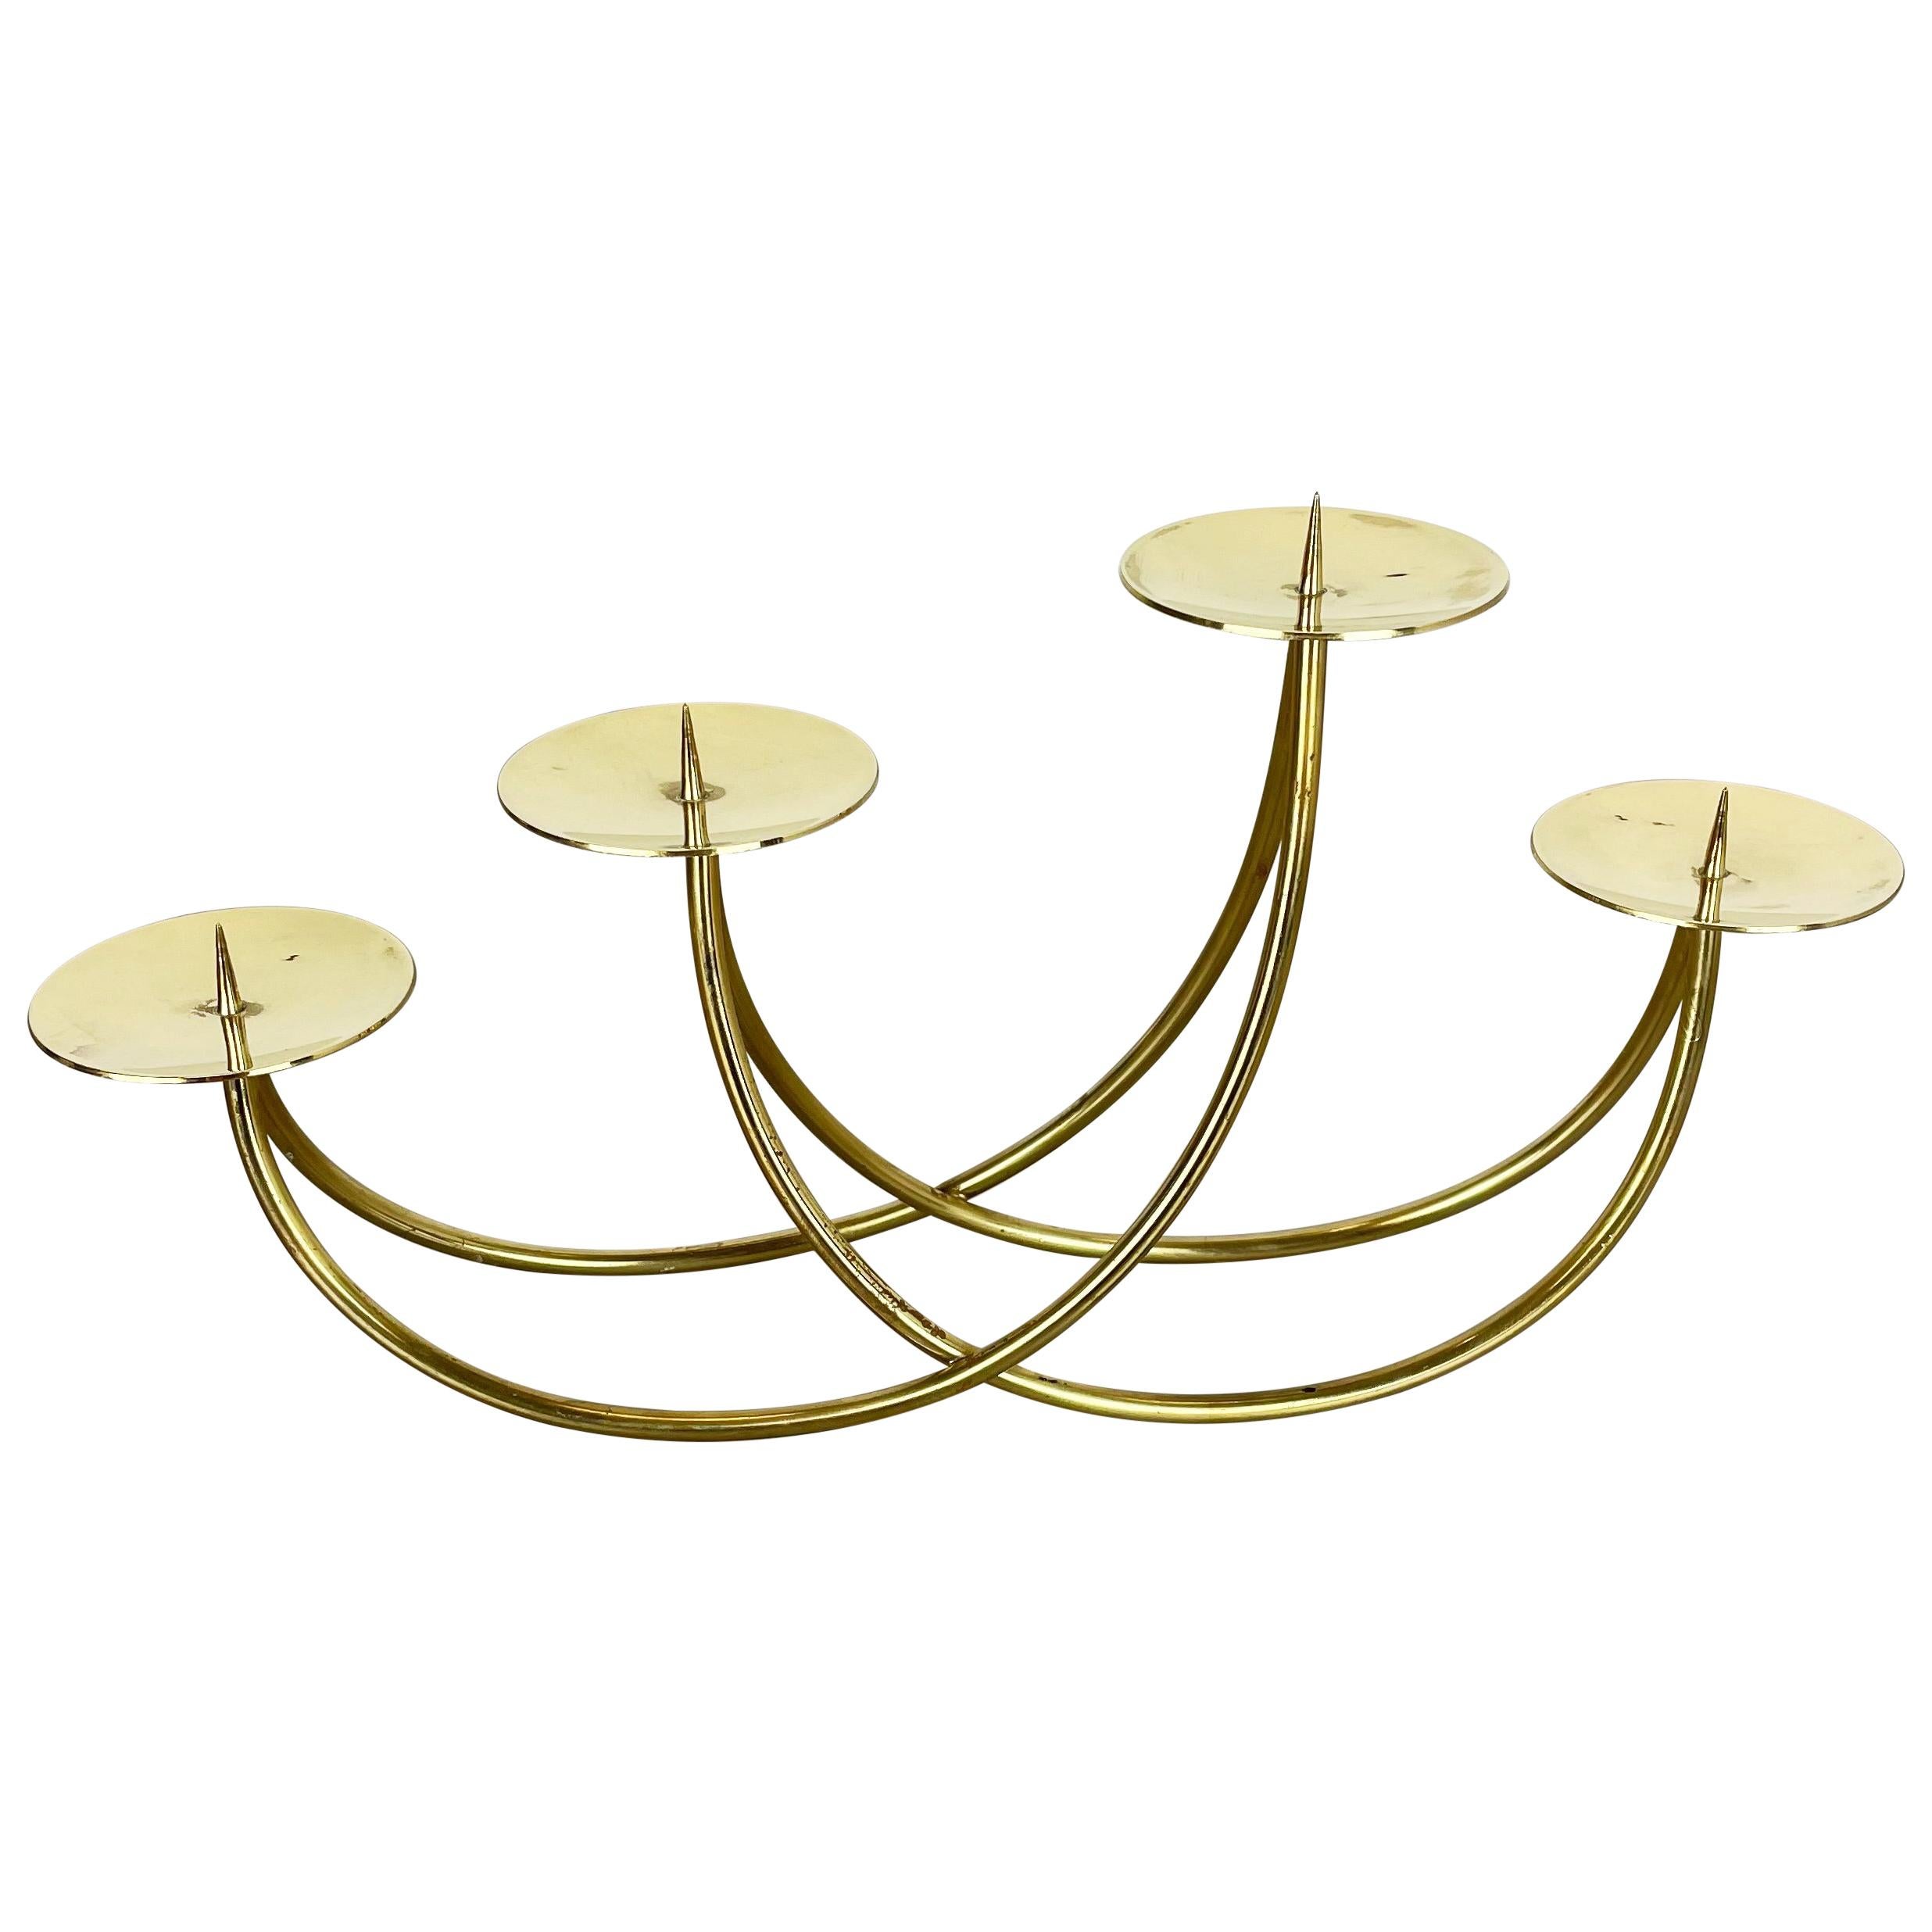 Sculptural Solid Brass Candleholder by Harald Buchrucker Bauhaus, Germany, 1950s For Sale